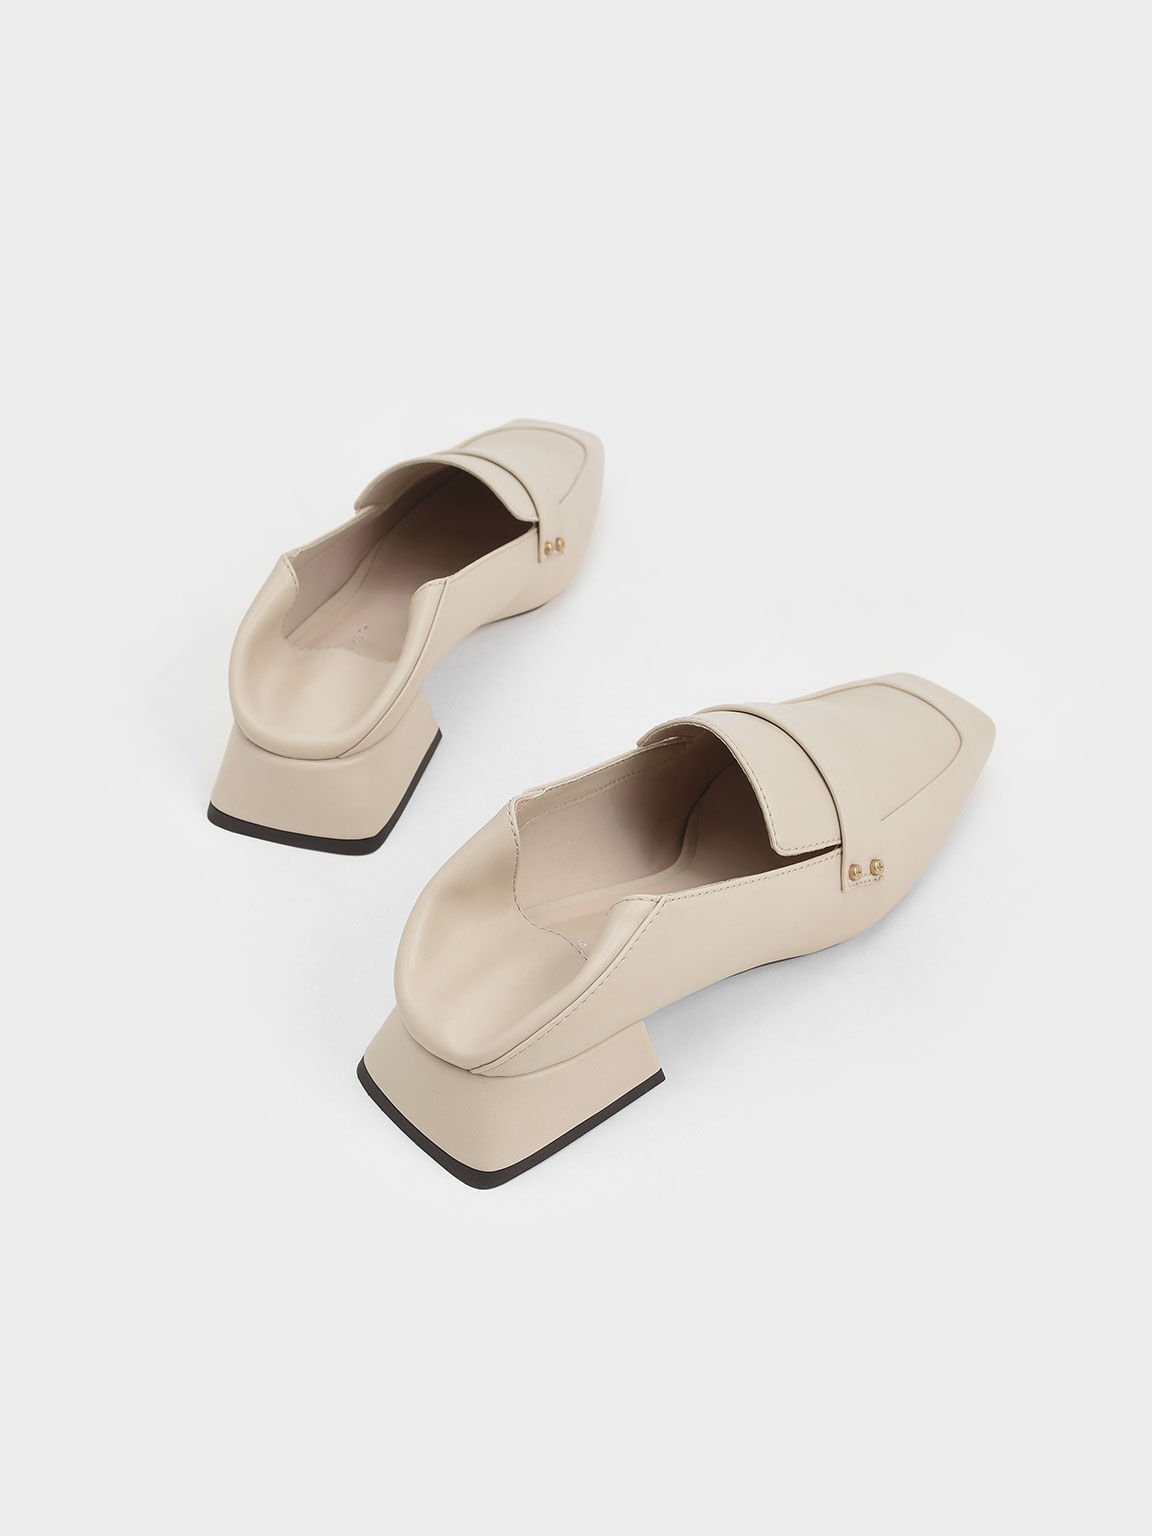 Square Toe Step-Back Penny Loafers, Cream, hi-res